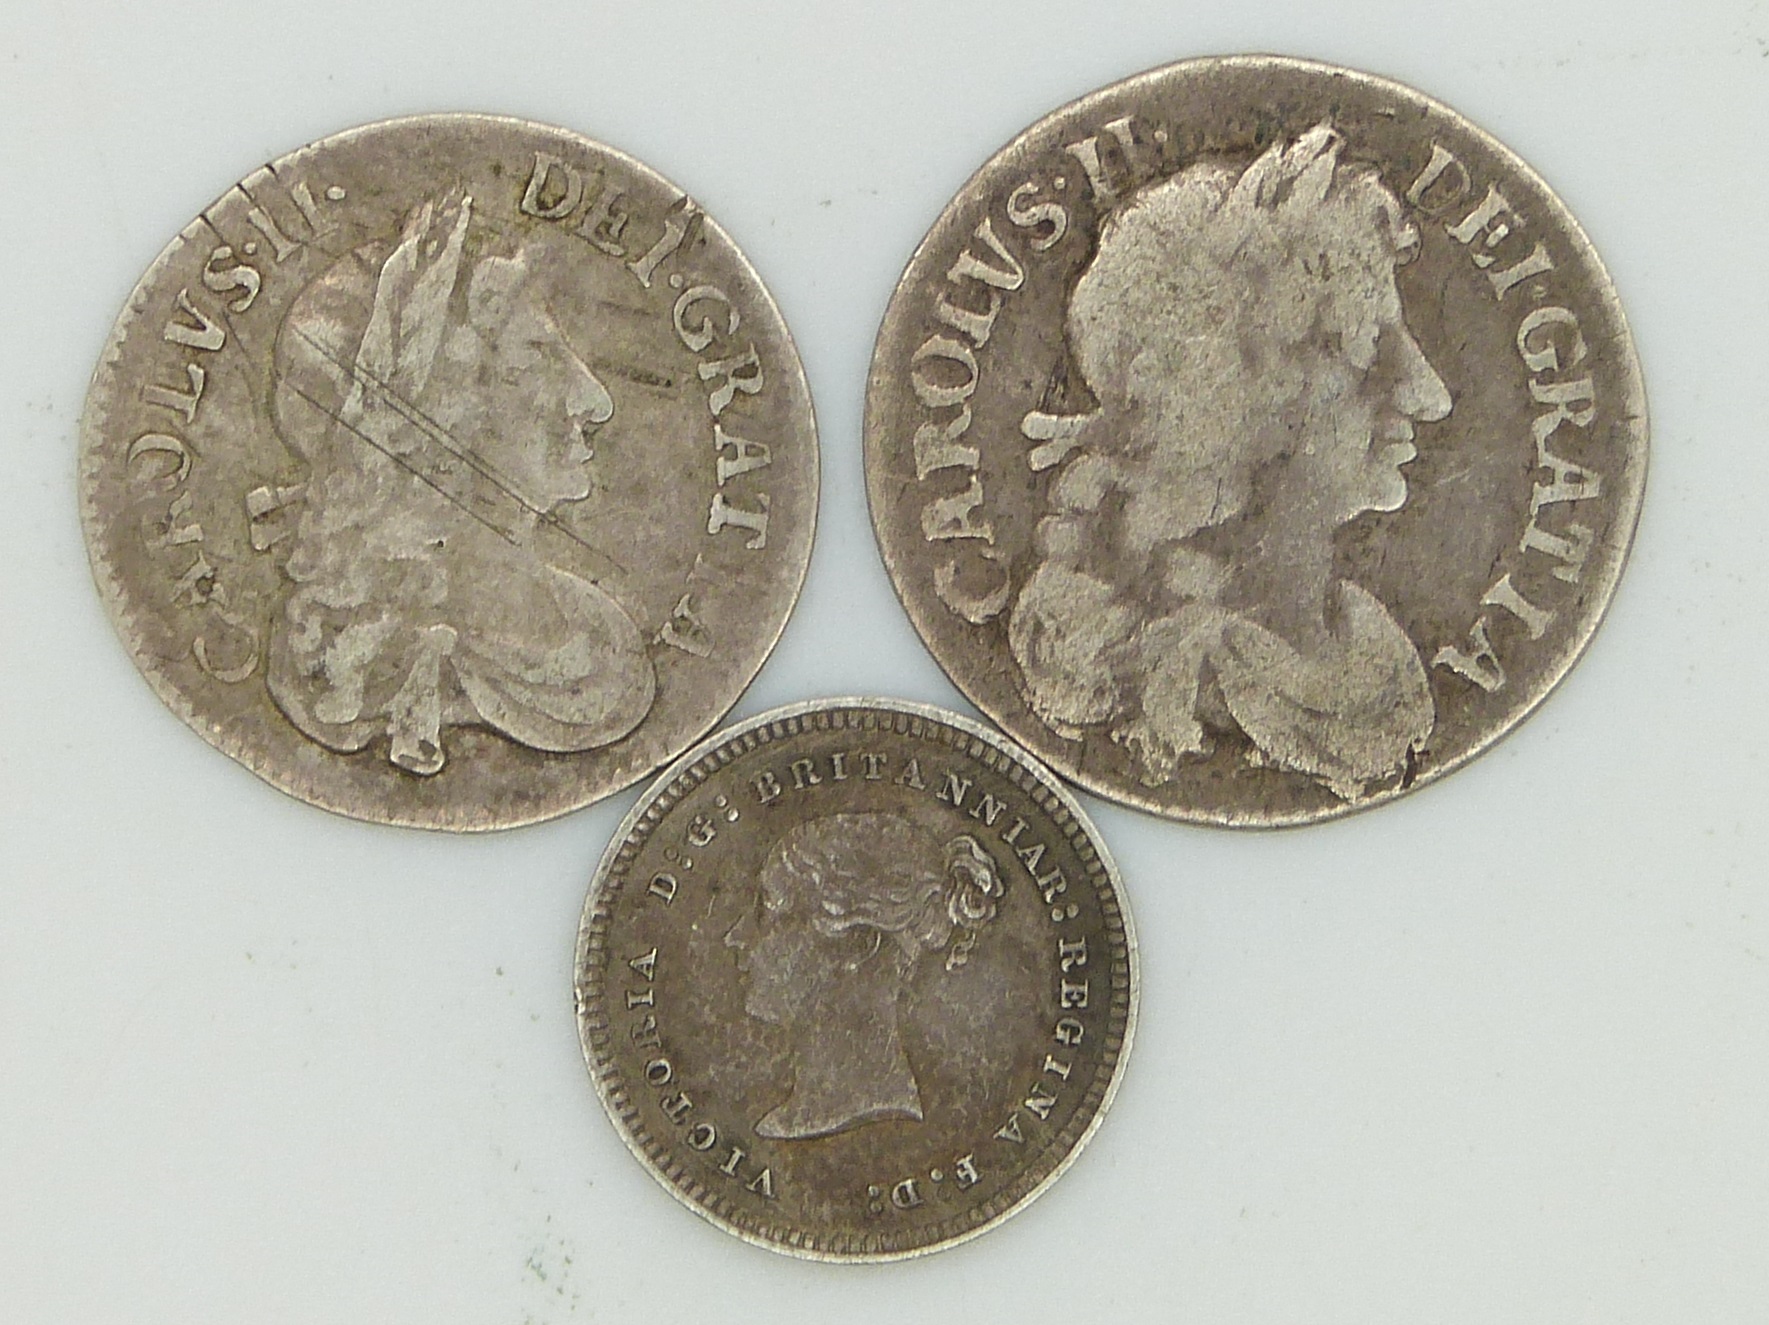 1679 Charles II Maundy fourpence together with a 1681 Maundy threepence and an 1880 Queen Victoria - Image 2 of 2